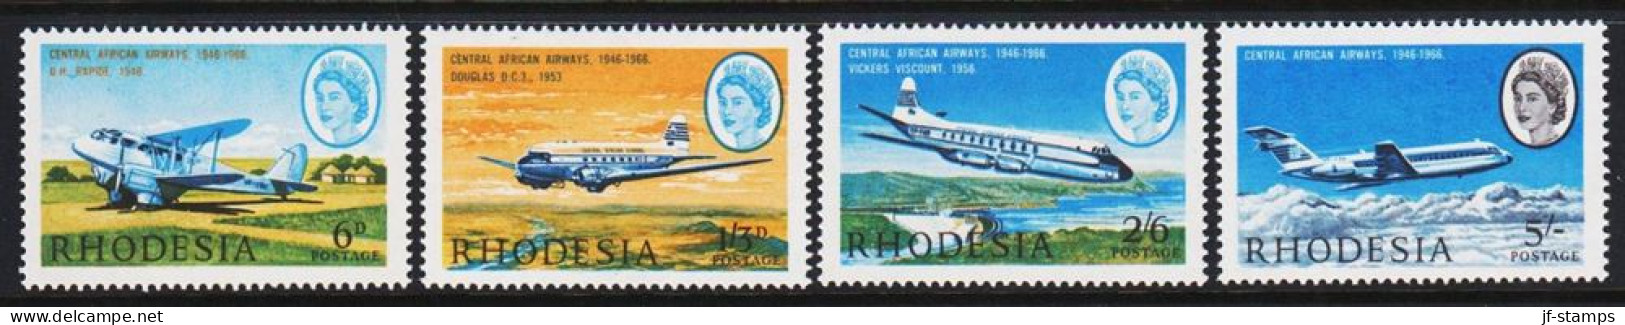 1966. RHODESIA. CENTRAL AFRICAN AIRWAYS. Complete Set With 4 Stamps Never Hinged.  (Michel 42-45) - JF545283 - Rhodesien (1964-1980)